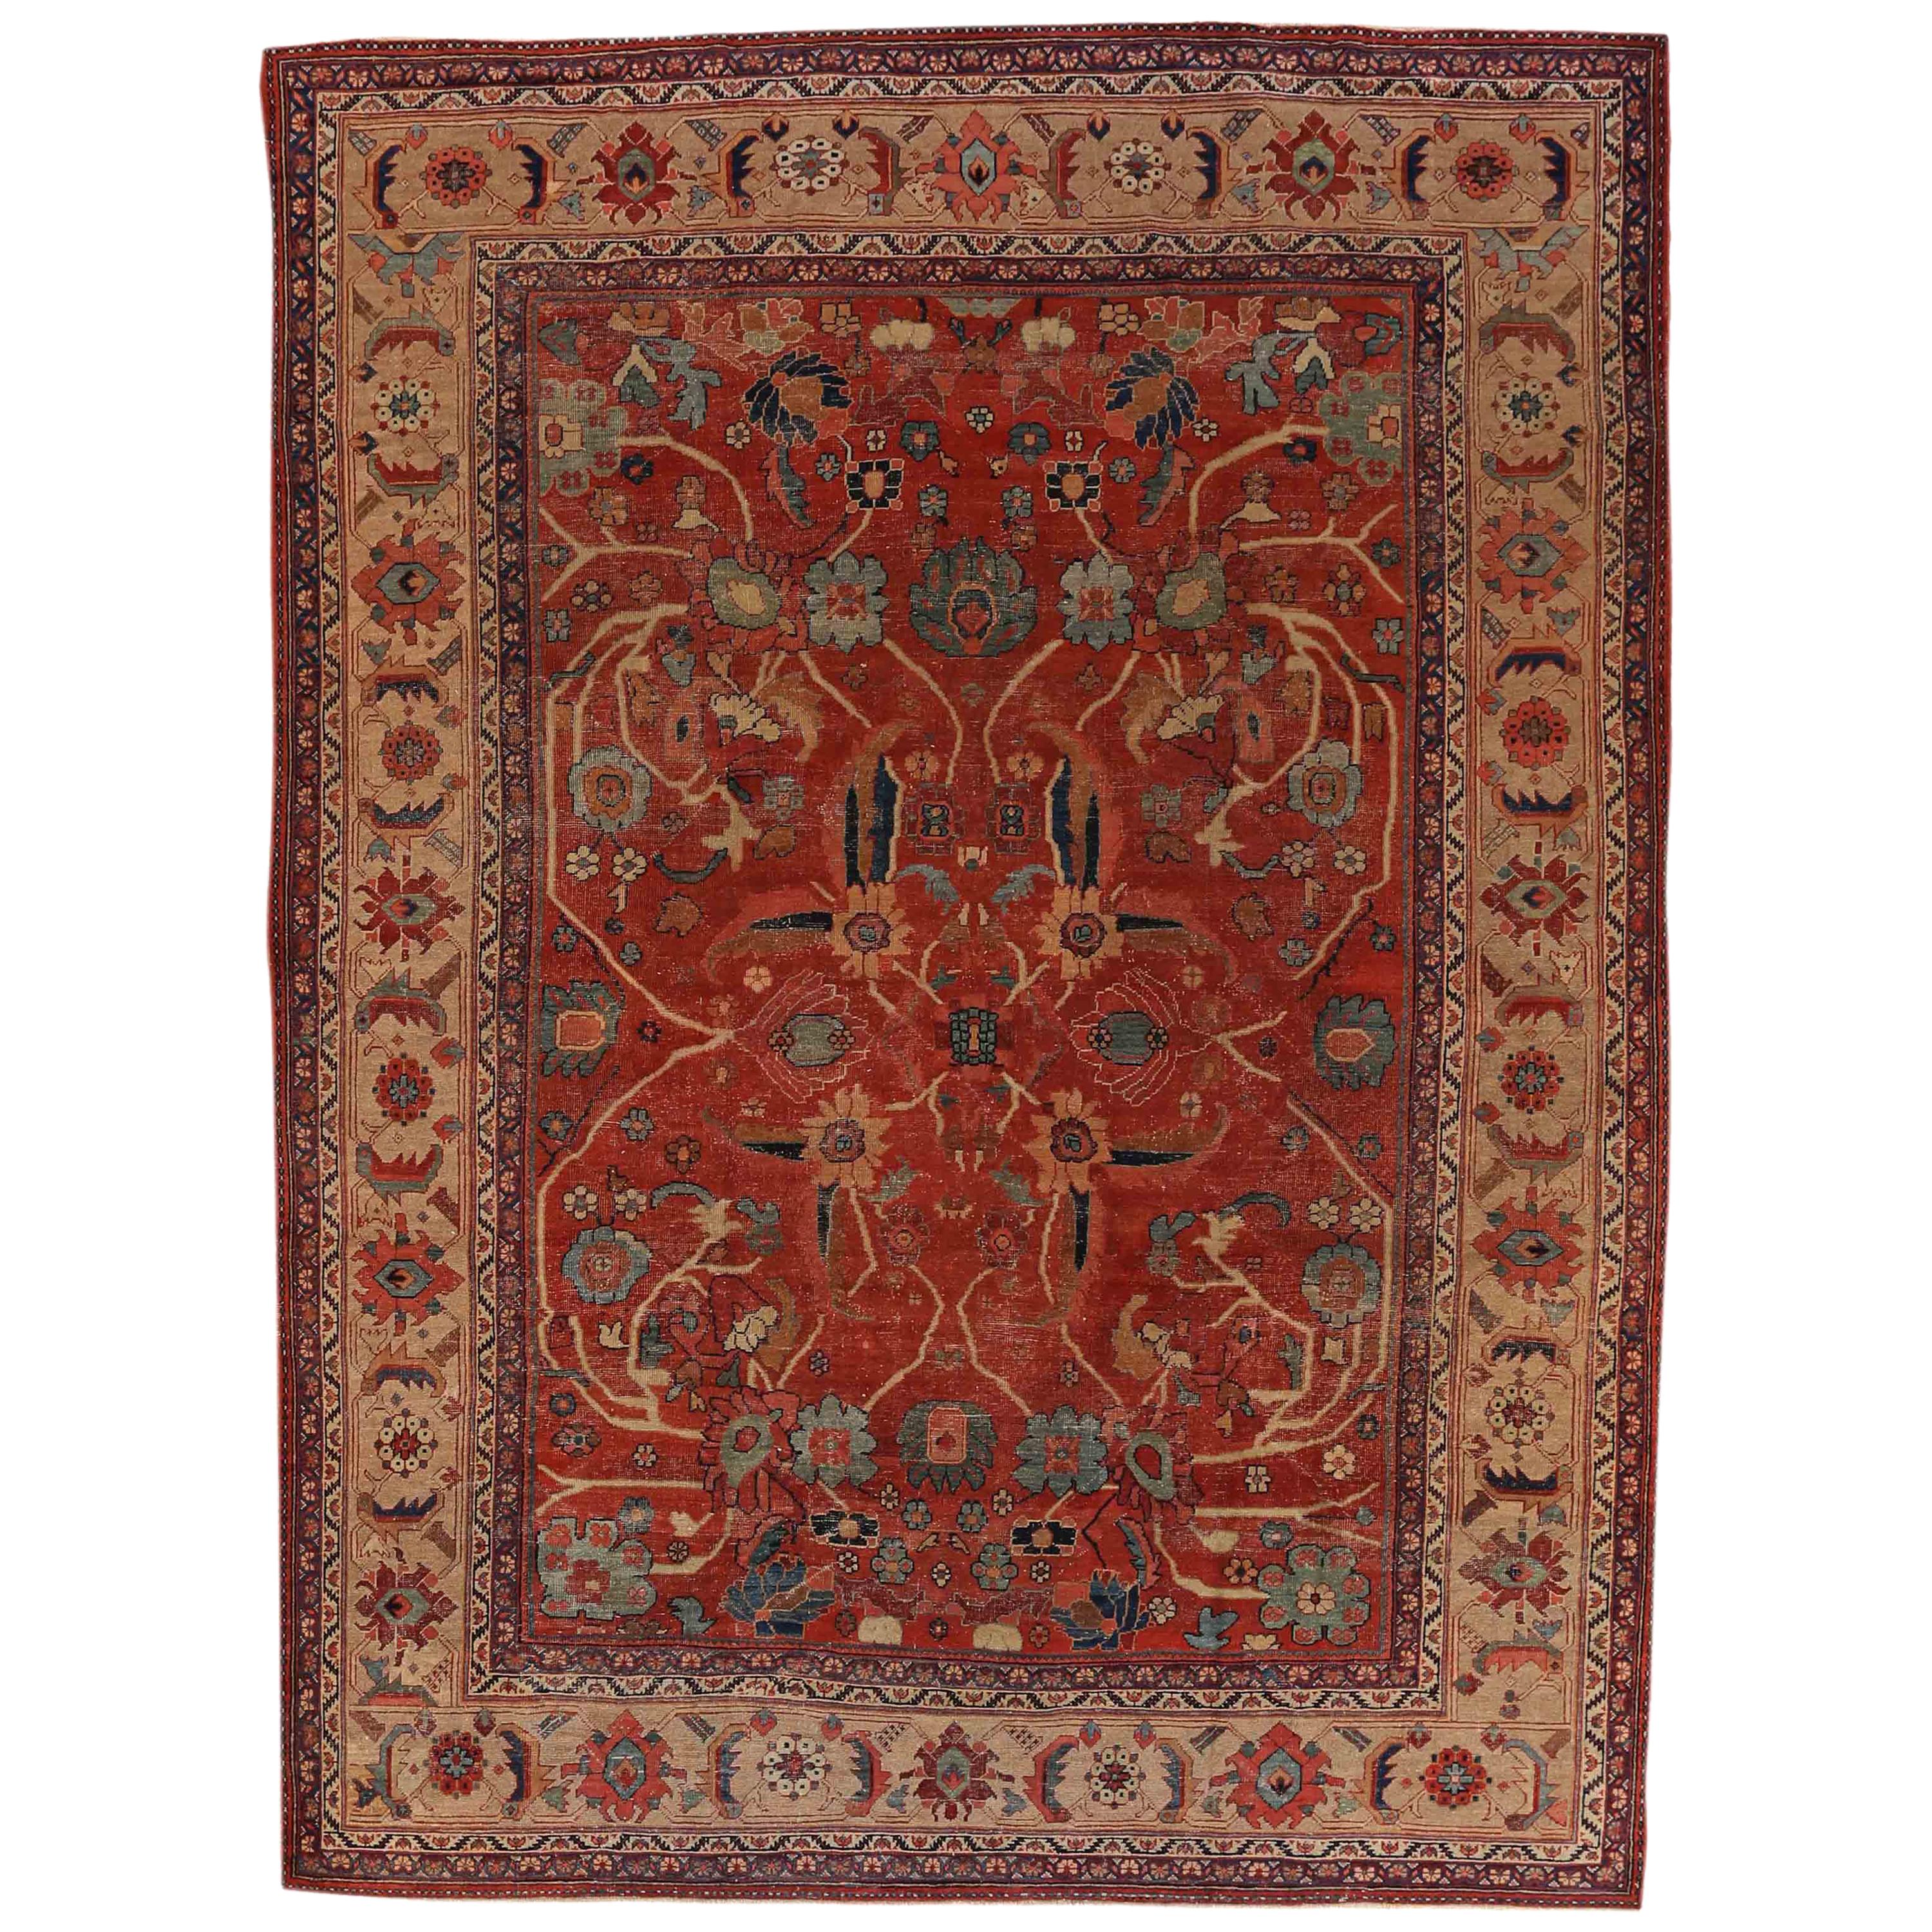 1940s Oversized Antique Sultanabad Persian Rug with Red and Black Floral Motif For Sale